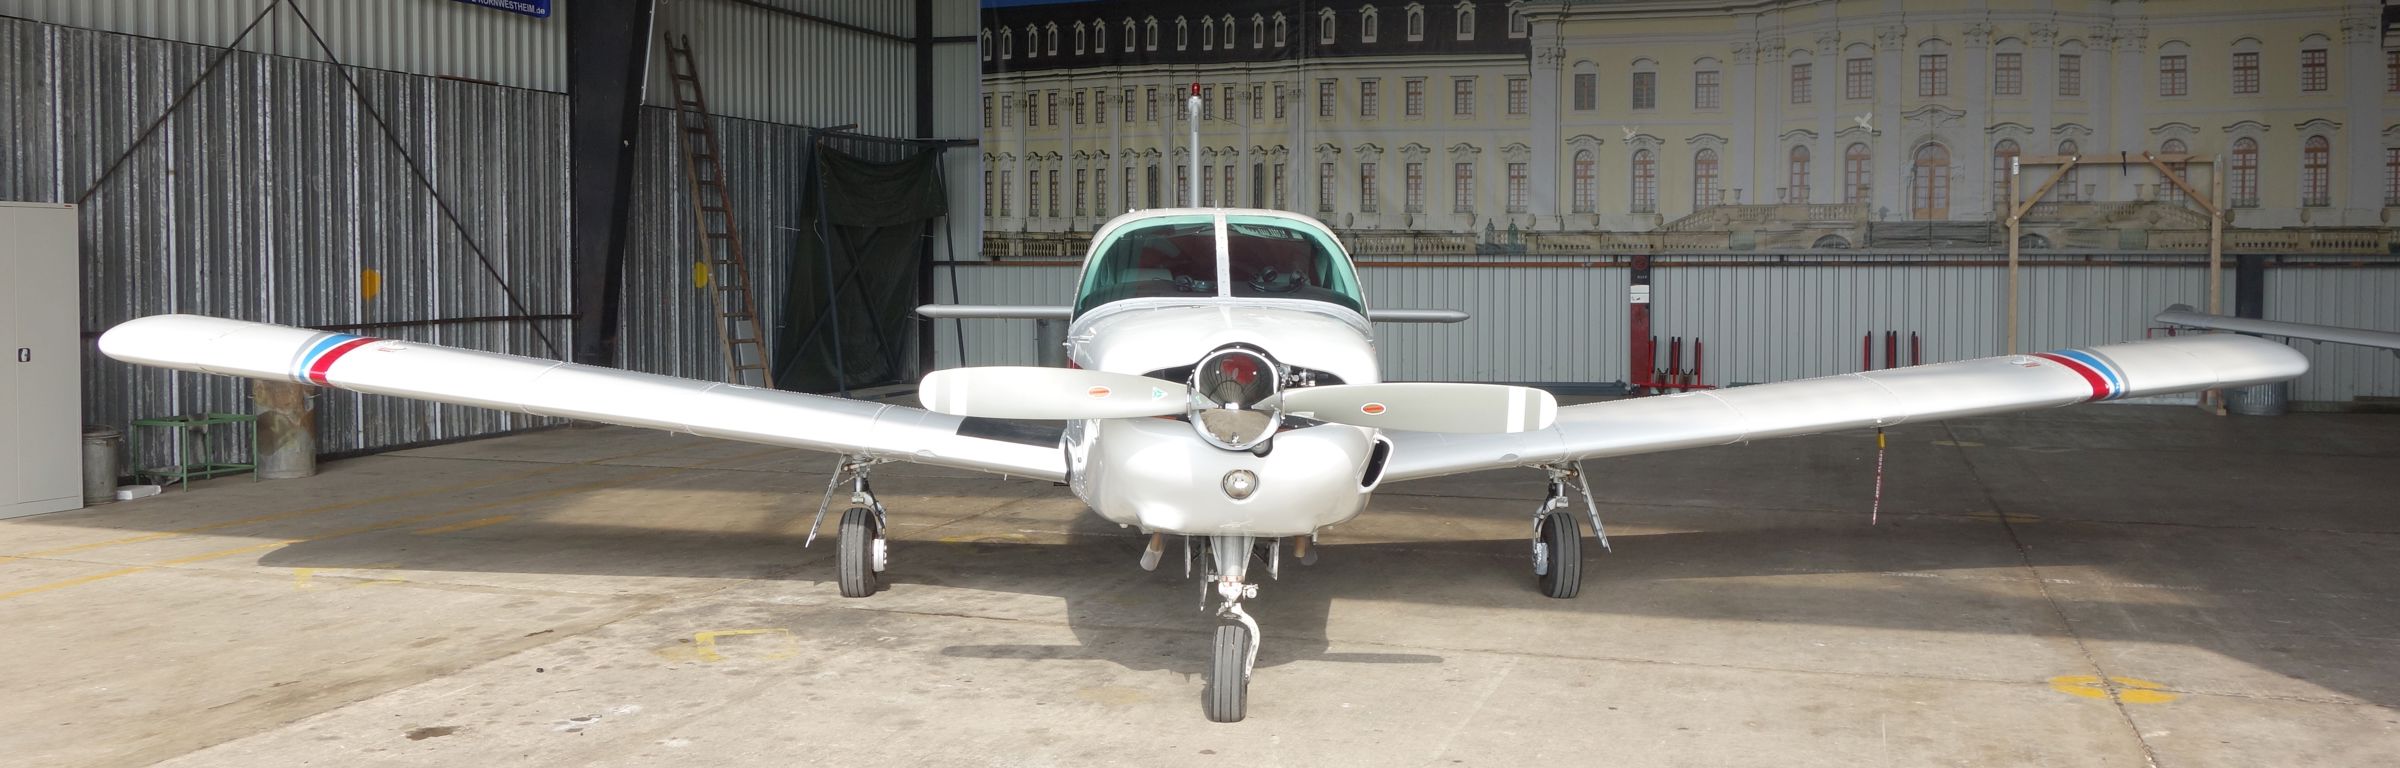 1978 Piper PA-32R-300 Lance - Exterior